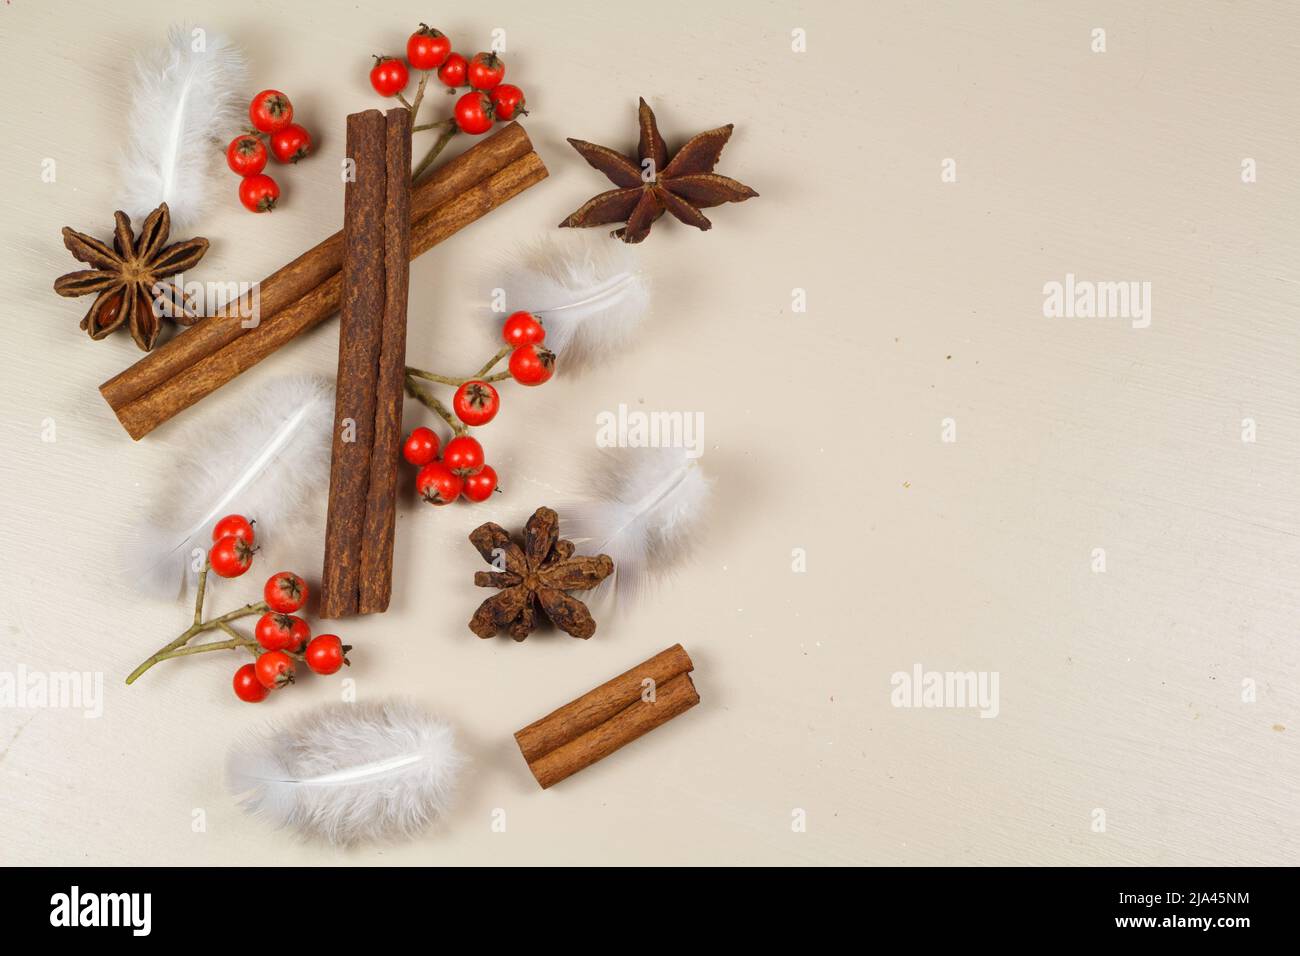 Cinnamon sticks, star anise, feather and red berries as decoration for Christmas Stock Photo